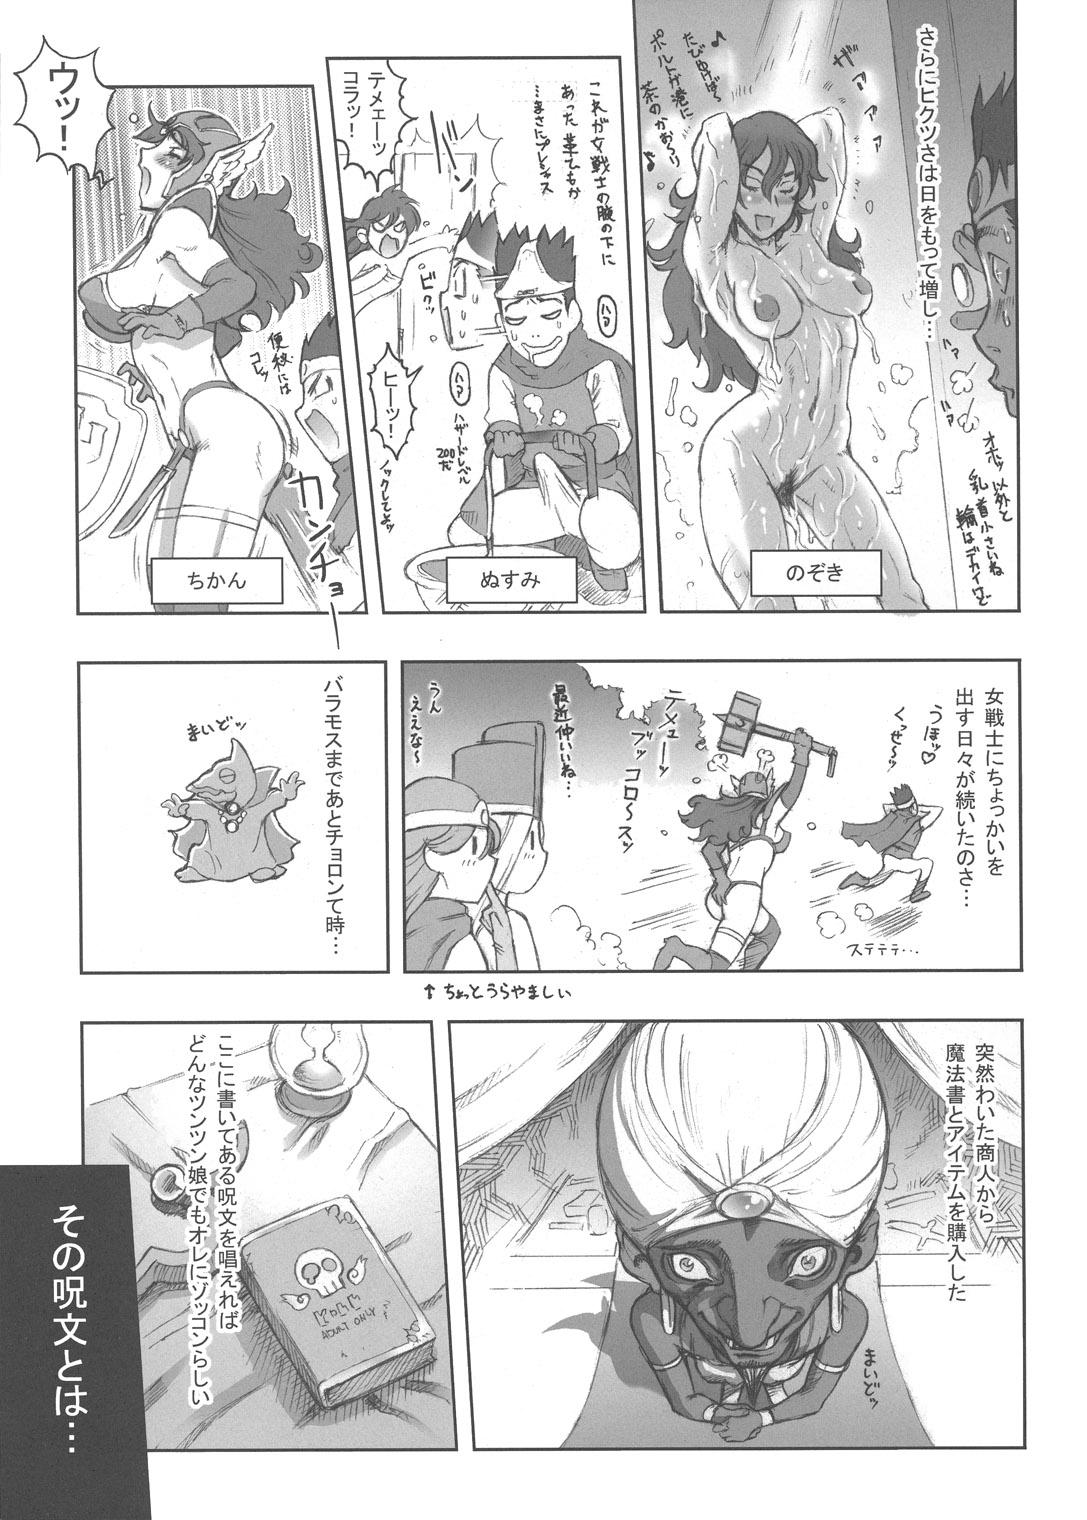 Lesbians Nippon Onna Heroine 3 - Sailor moon Dragon quest iii Hairypussy - Page 6